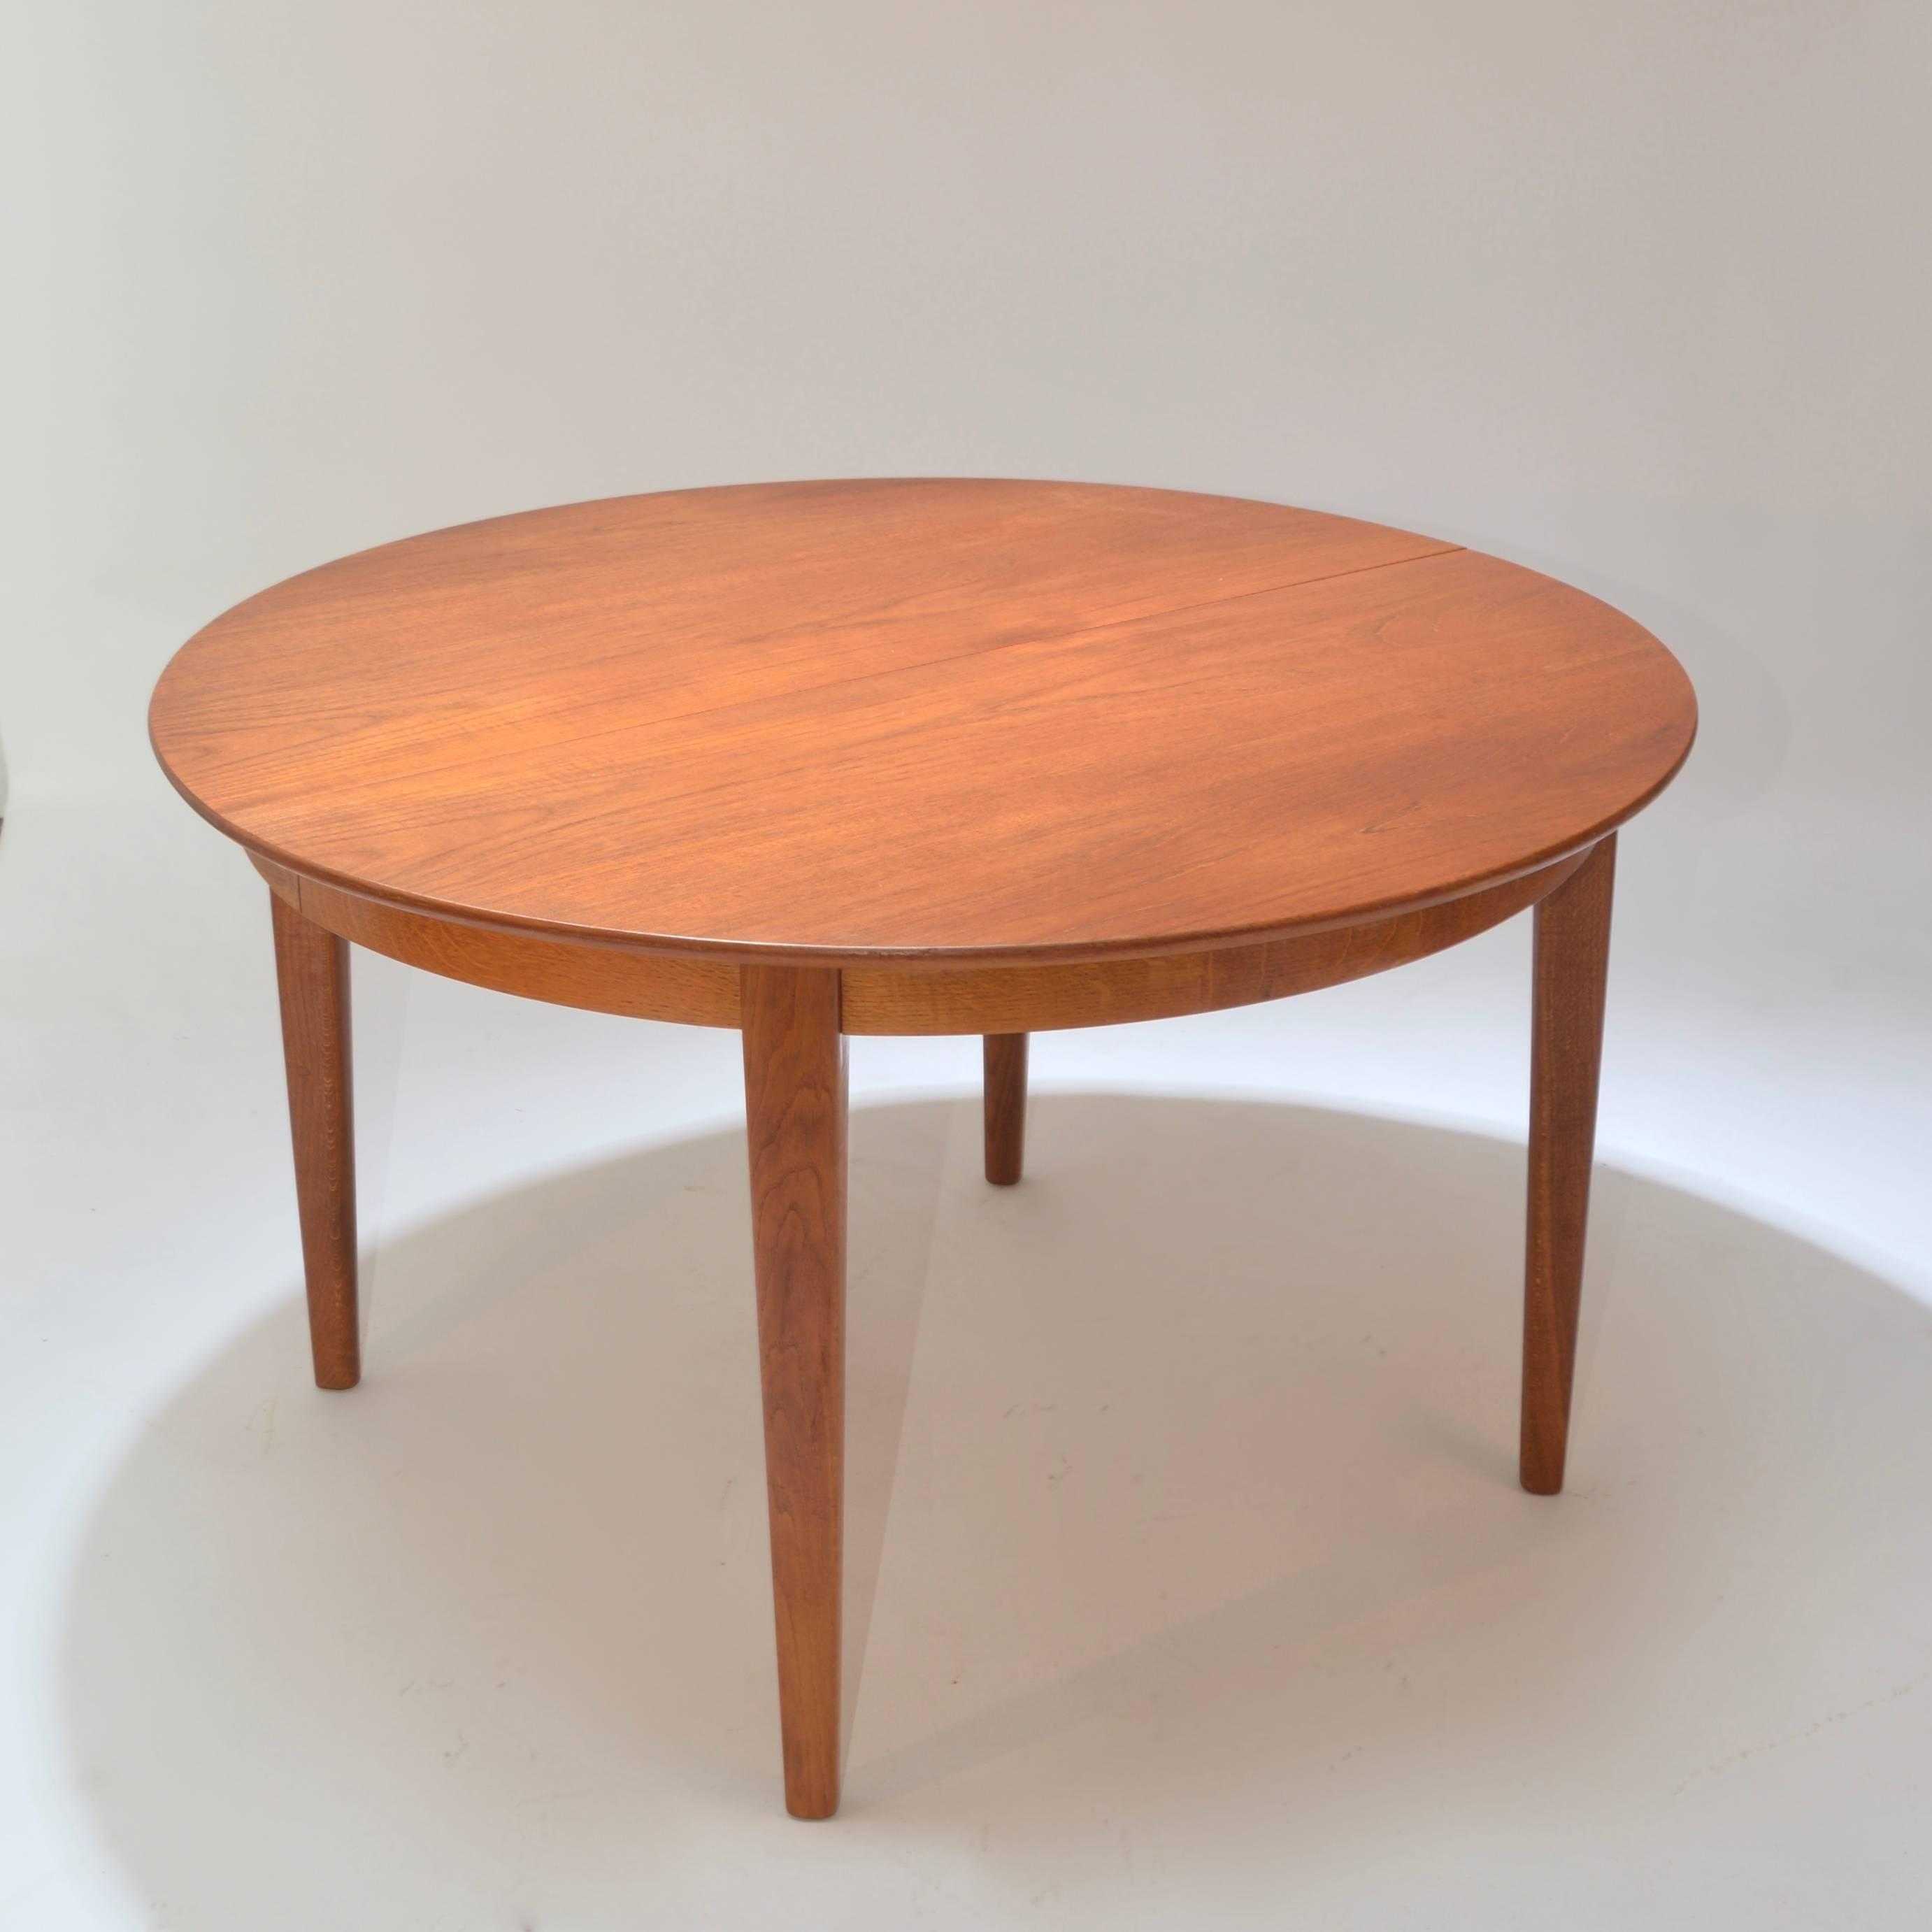 Beautiful Henning Kjaernulf teak dining table. This table was painstakingly handcrafted by the Danish maker Sorø Stolefabrik. Drop down center leg pops down when table is fully expanded. This table comes with one 20" leaf and can accommodate 3